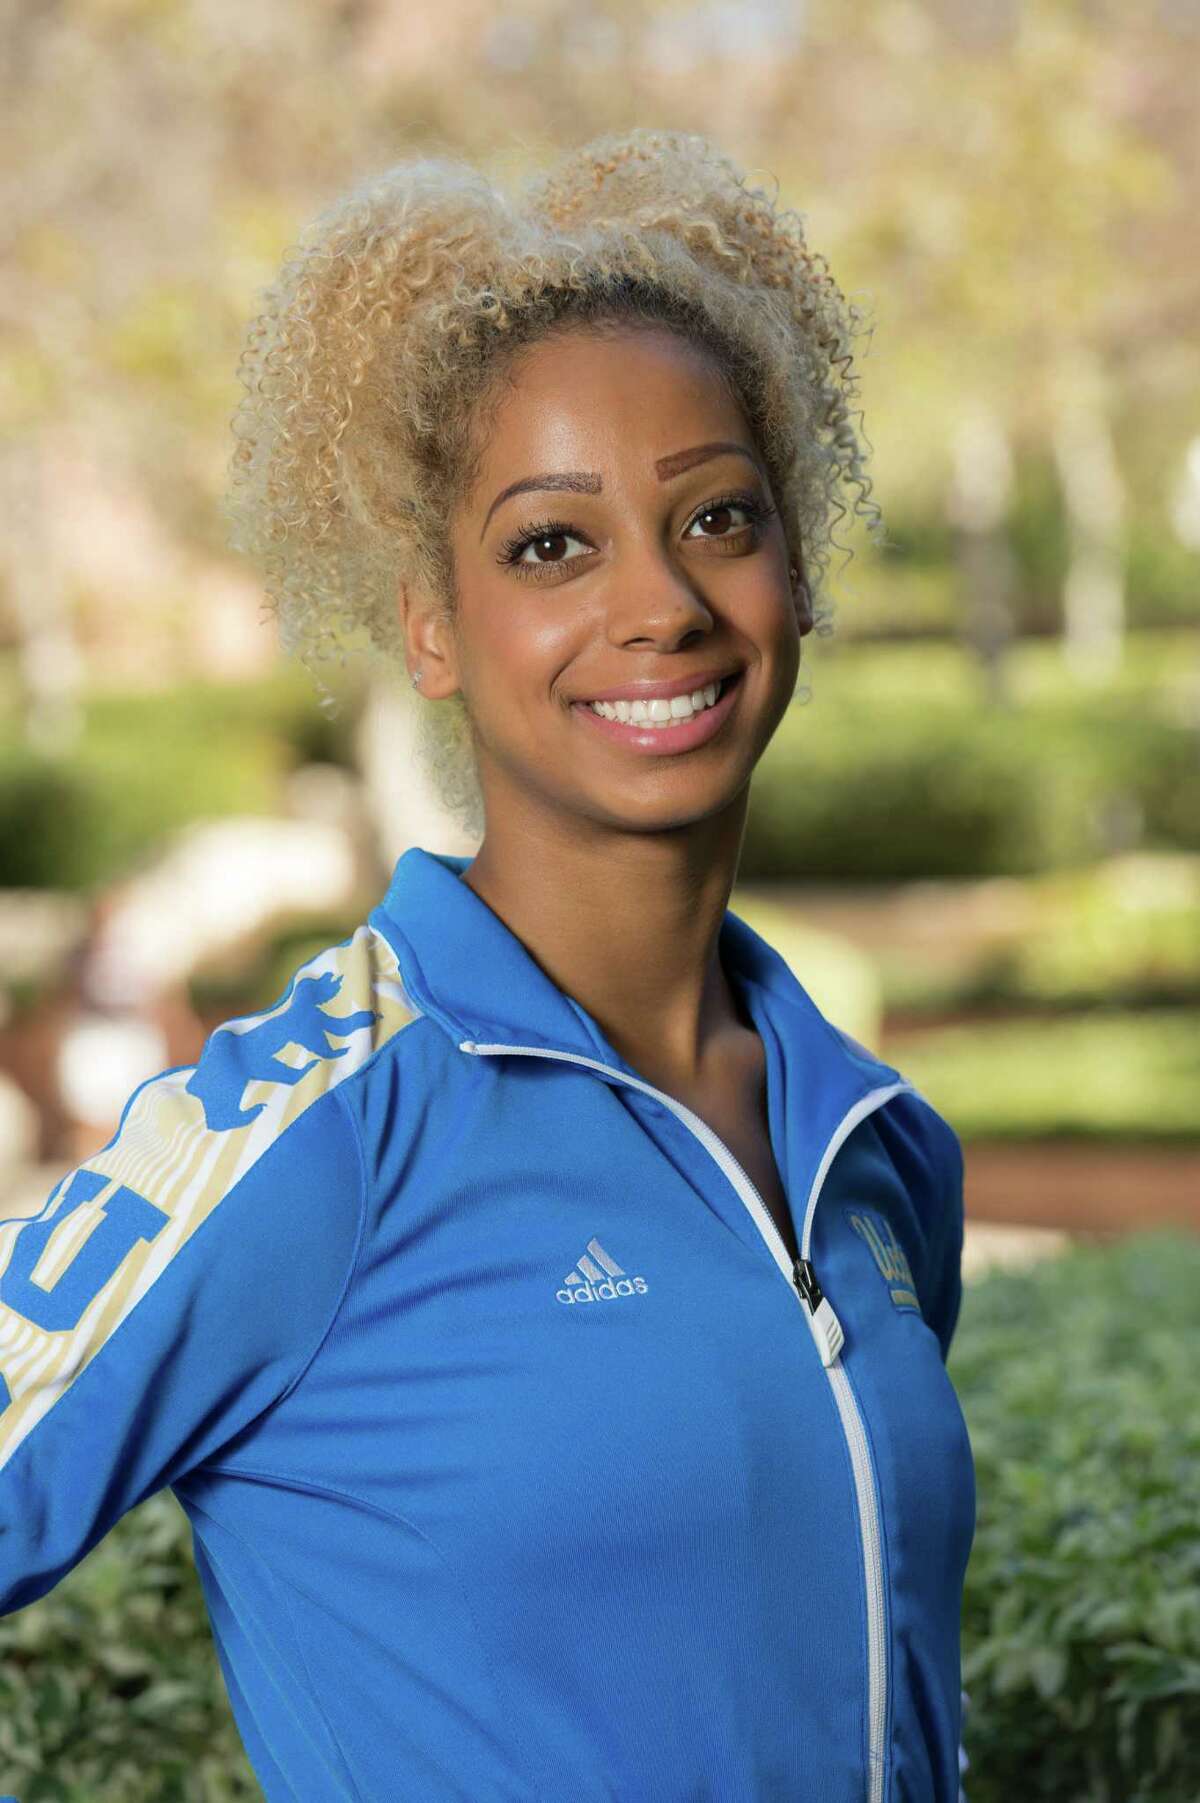 Former UCLA gymnast Danusia Francis, who will compete in the Aurora Games on Wednesday, Aug. 21, at Times Union Center. (UCLA athletics)